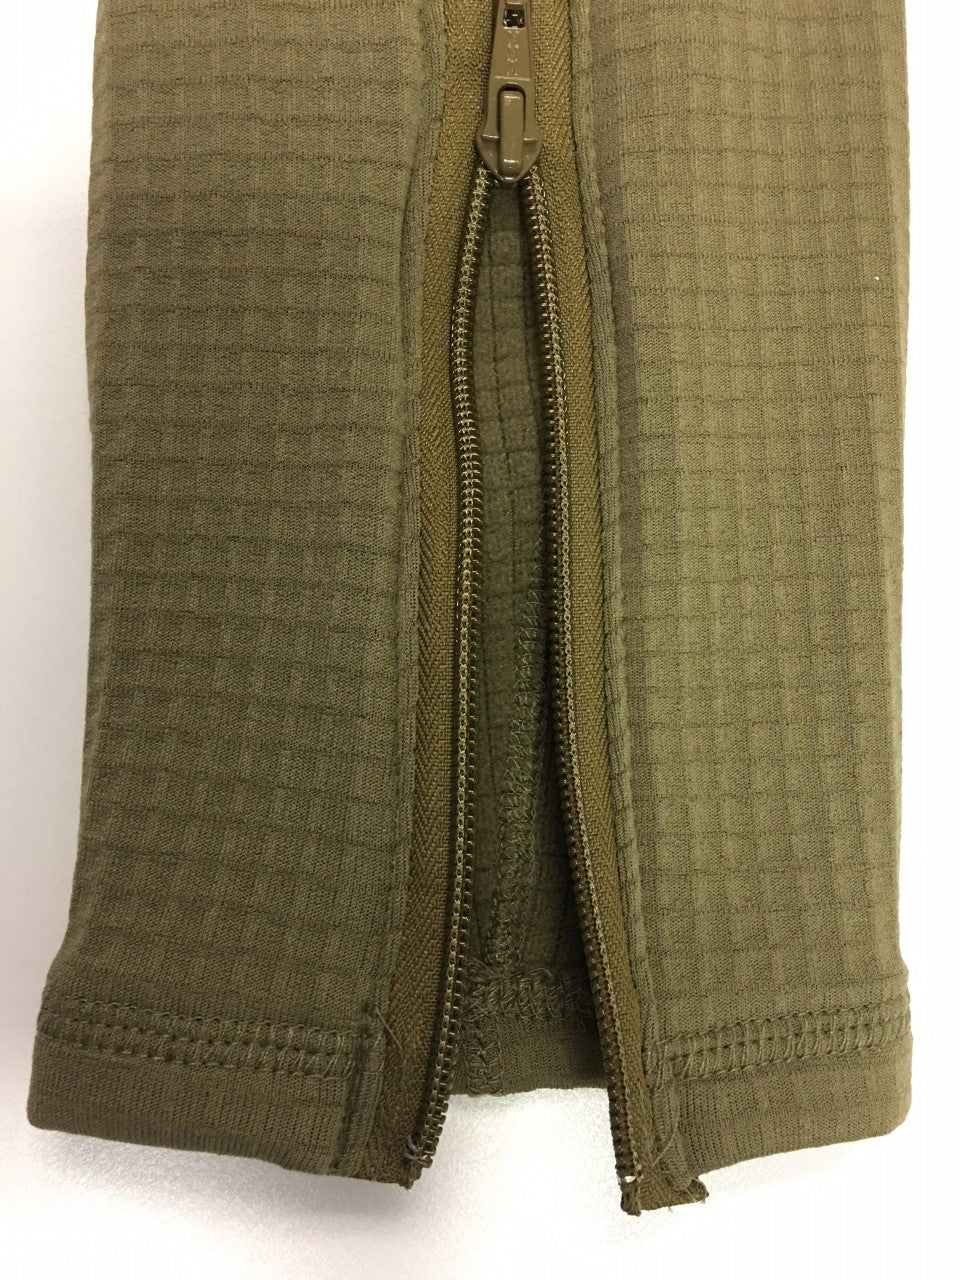 XGO Underwear (Ranger School Approved) – Troops Military Supply